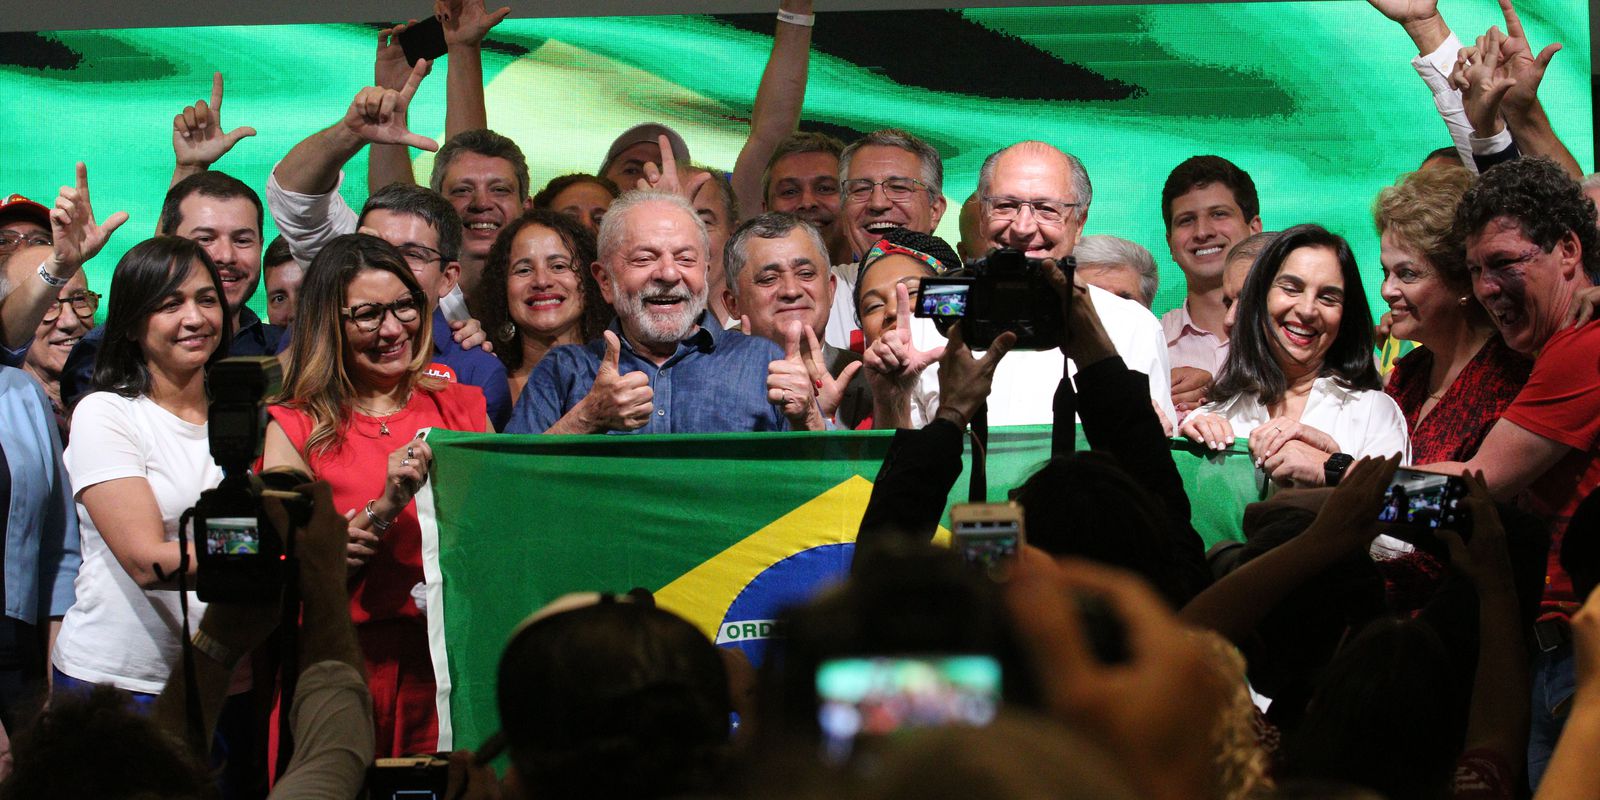 In his first speech, Lula says that fighting poverty is his mission